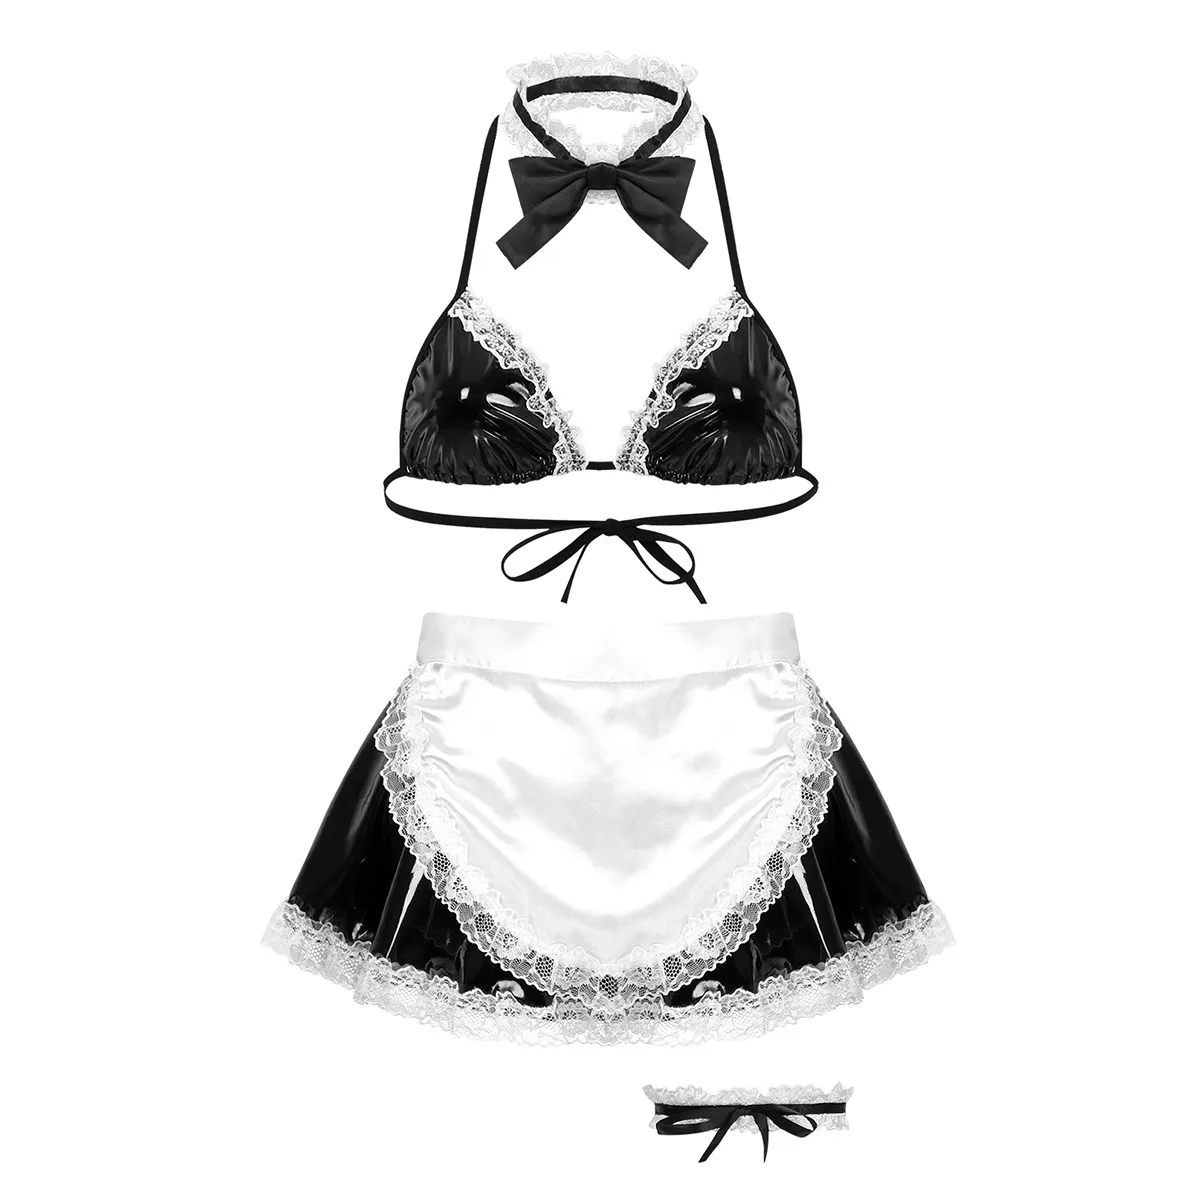 

Womens Exotic Halloween Parties Anime Maid Dress Fancy Cosplay Sexy Costumes Bra Top + Skirt G-string Briefs with Apron Necklace